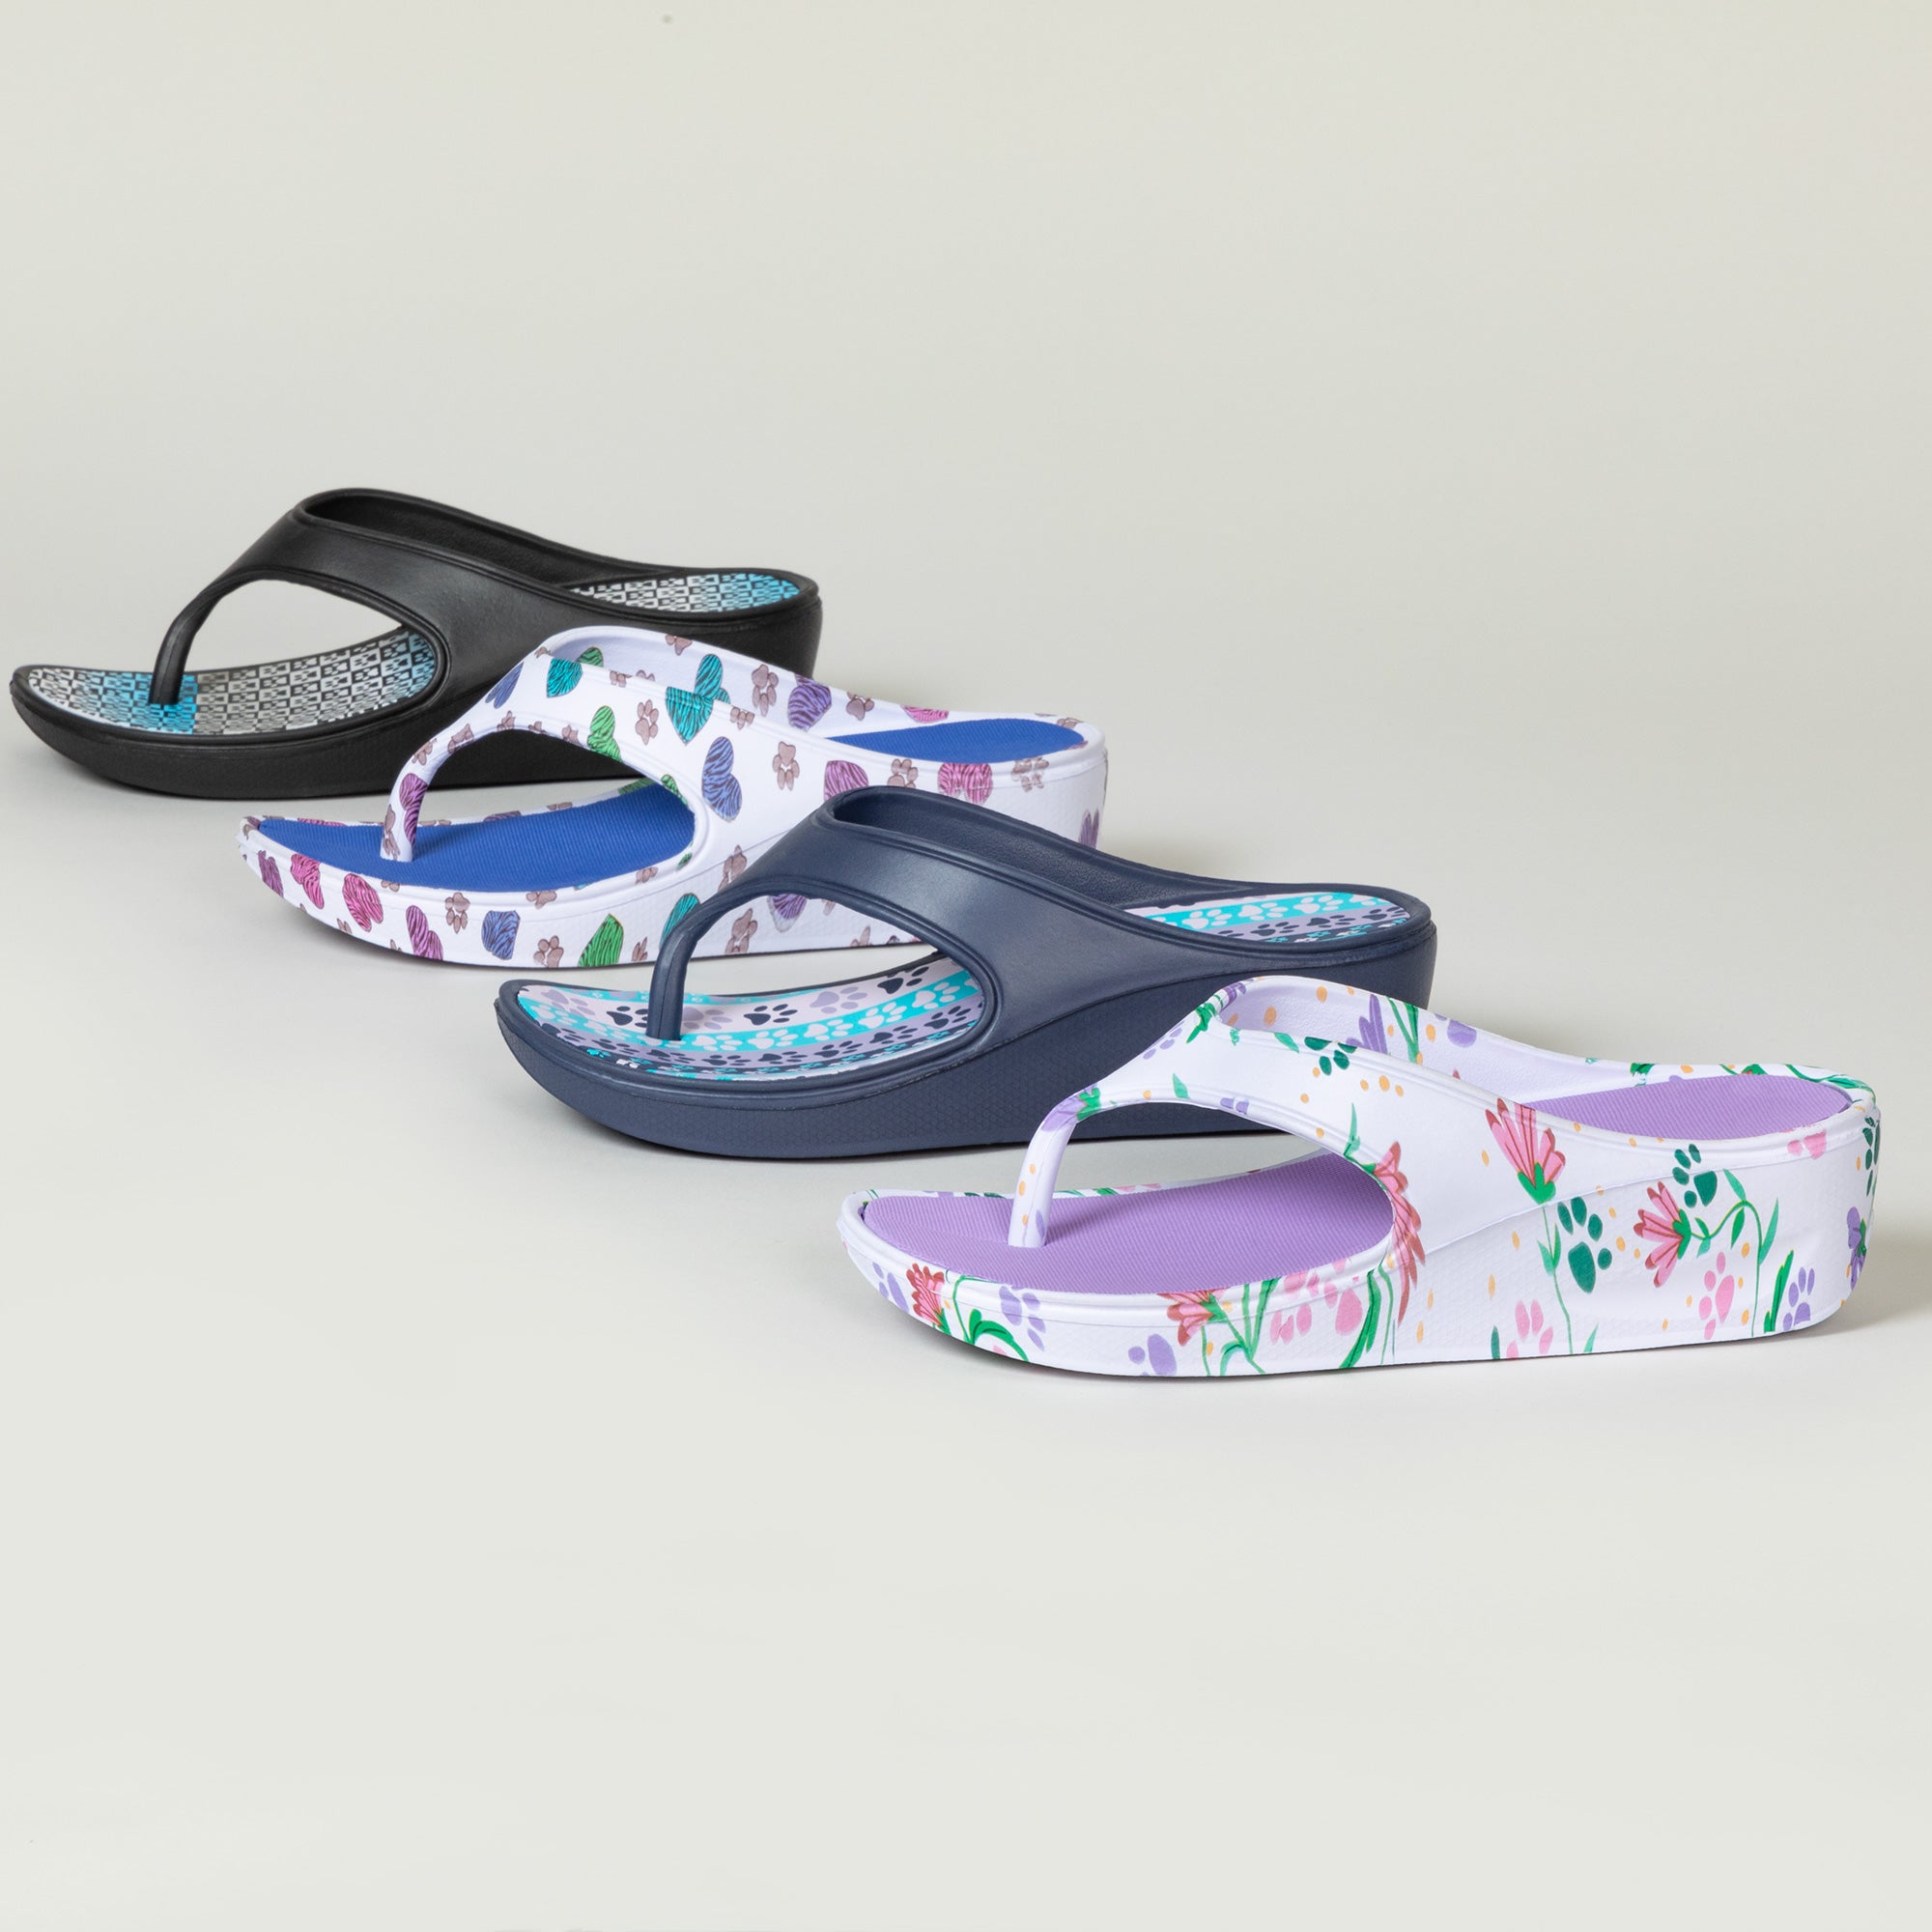 Paw Print Wedge Flip Flops - Paws & Hearts - 8